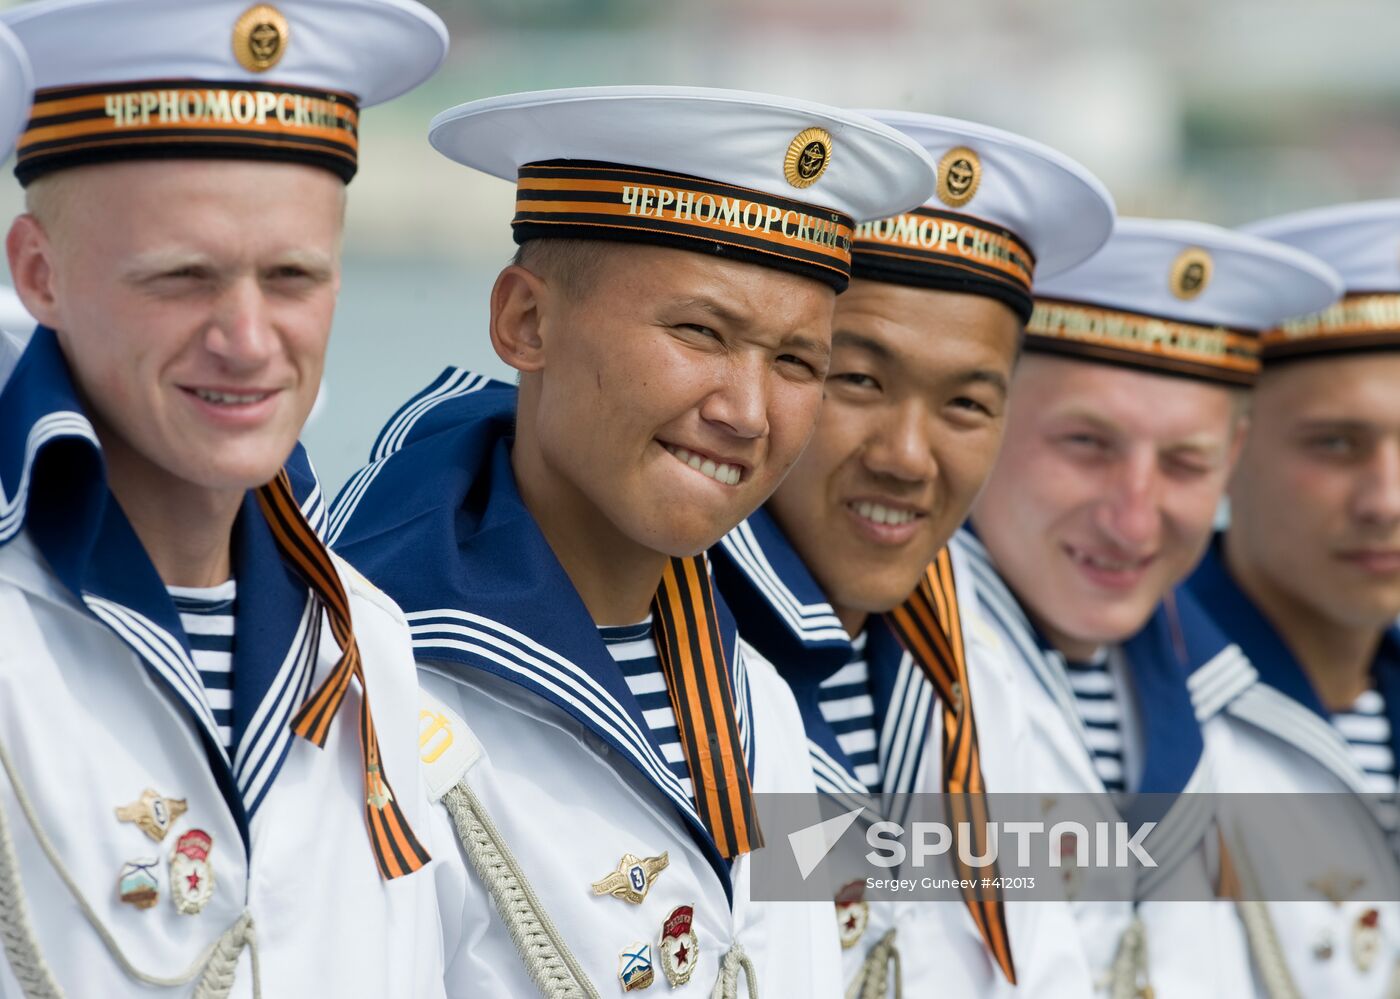 Guided missile cruiser Moskva sailors